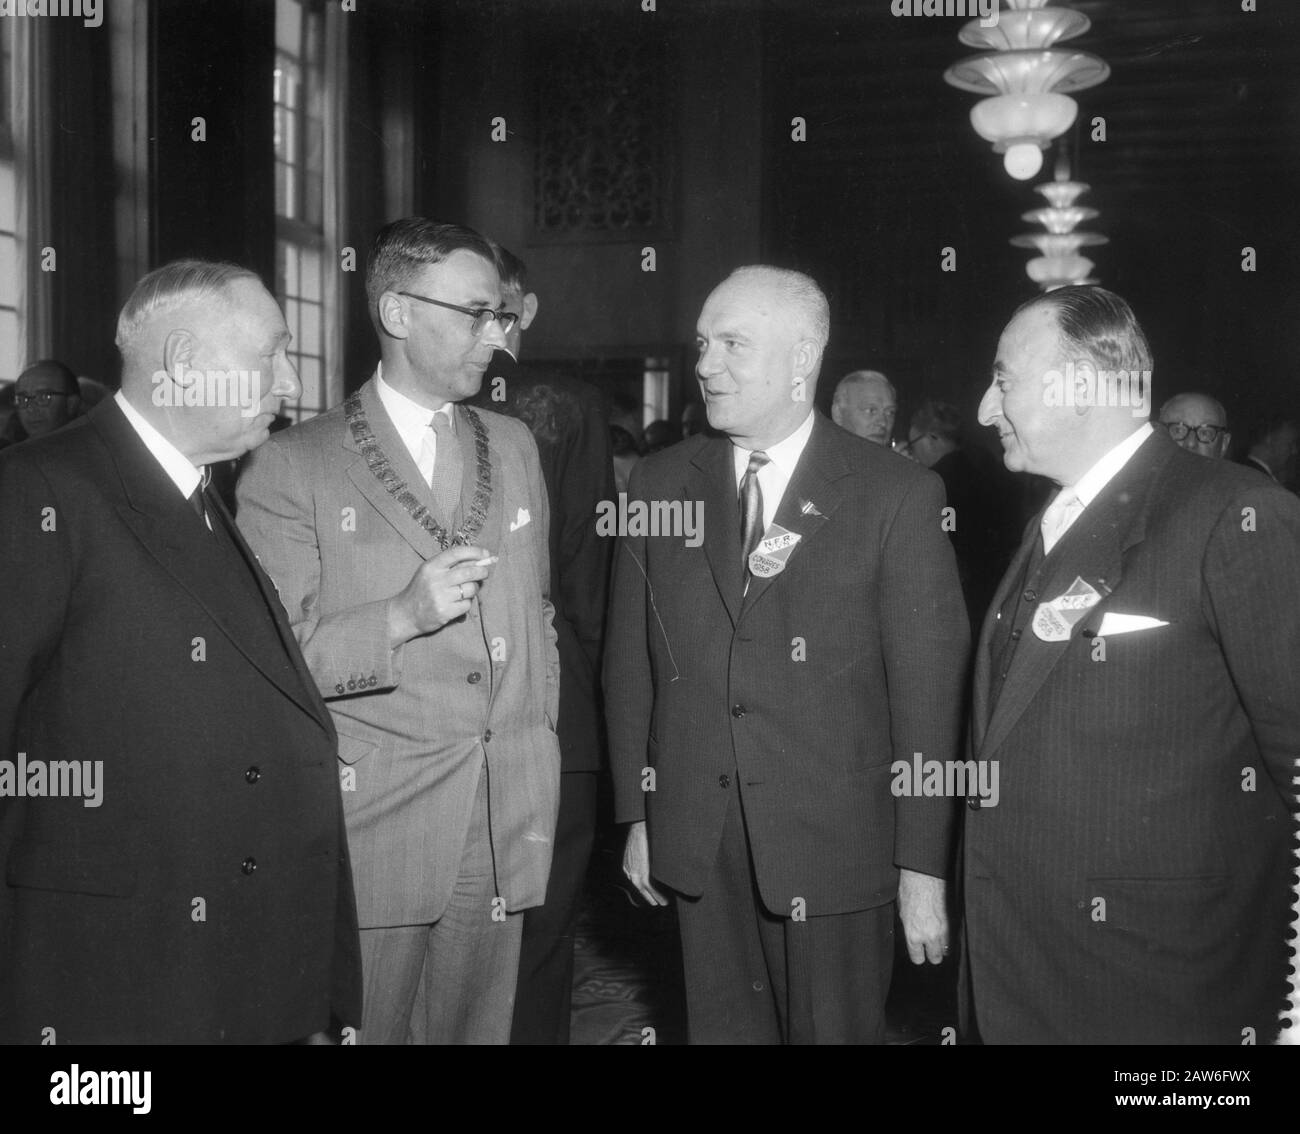 Welcome by Mayor Van Hall of members of the National Federal Council of the former opposition in the Netherlands Date: June 6, 1958 Keywords: Revenue, mayors, members Stock Photo